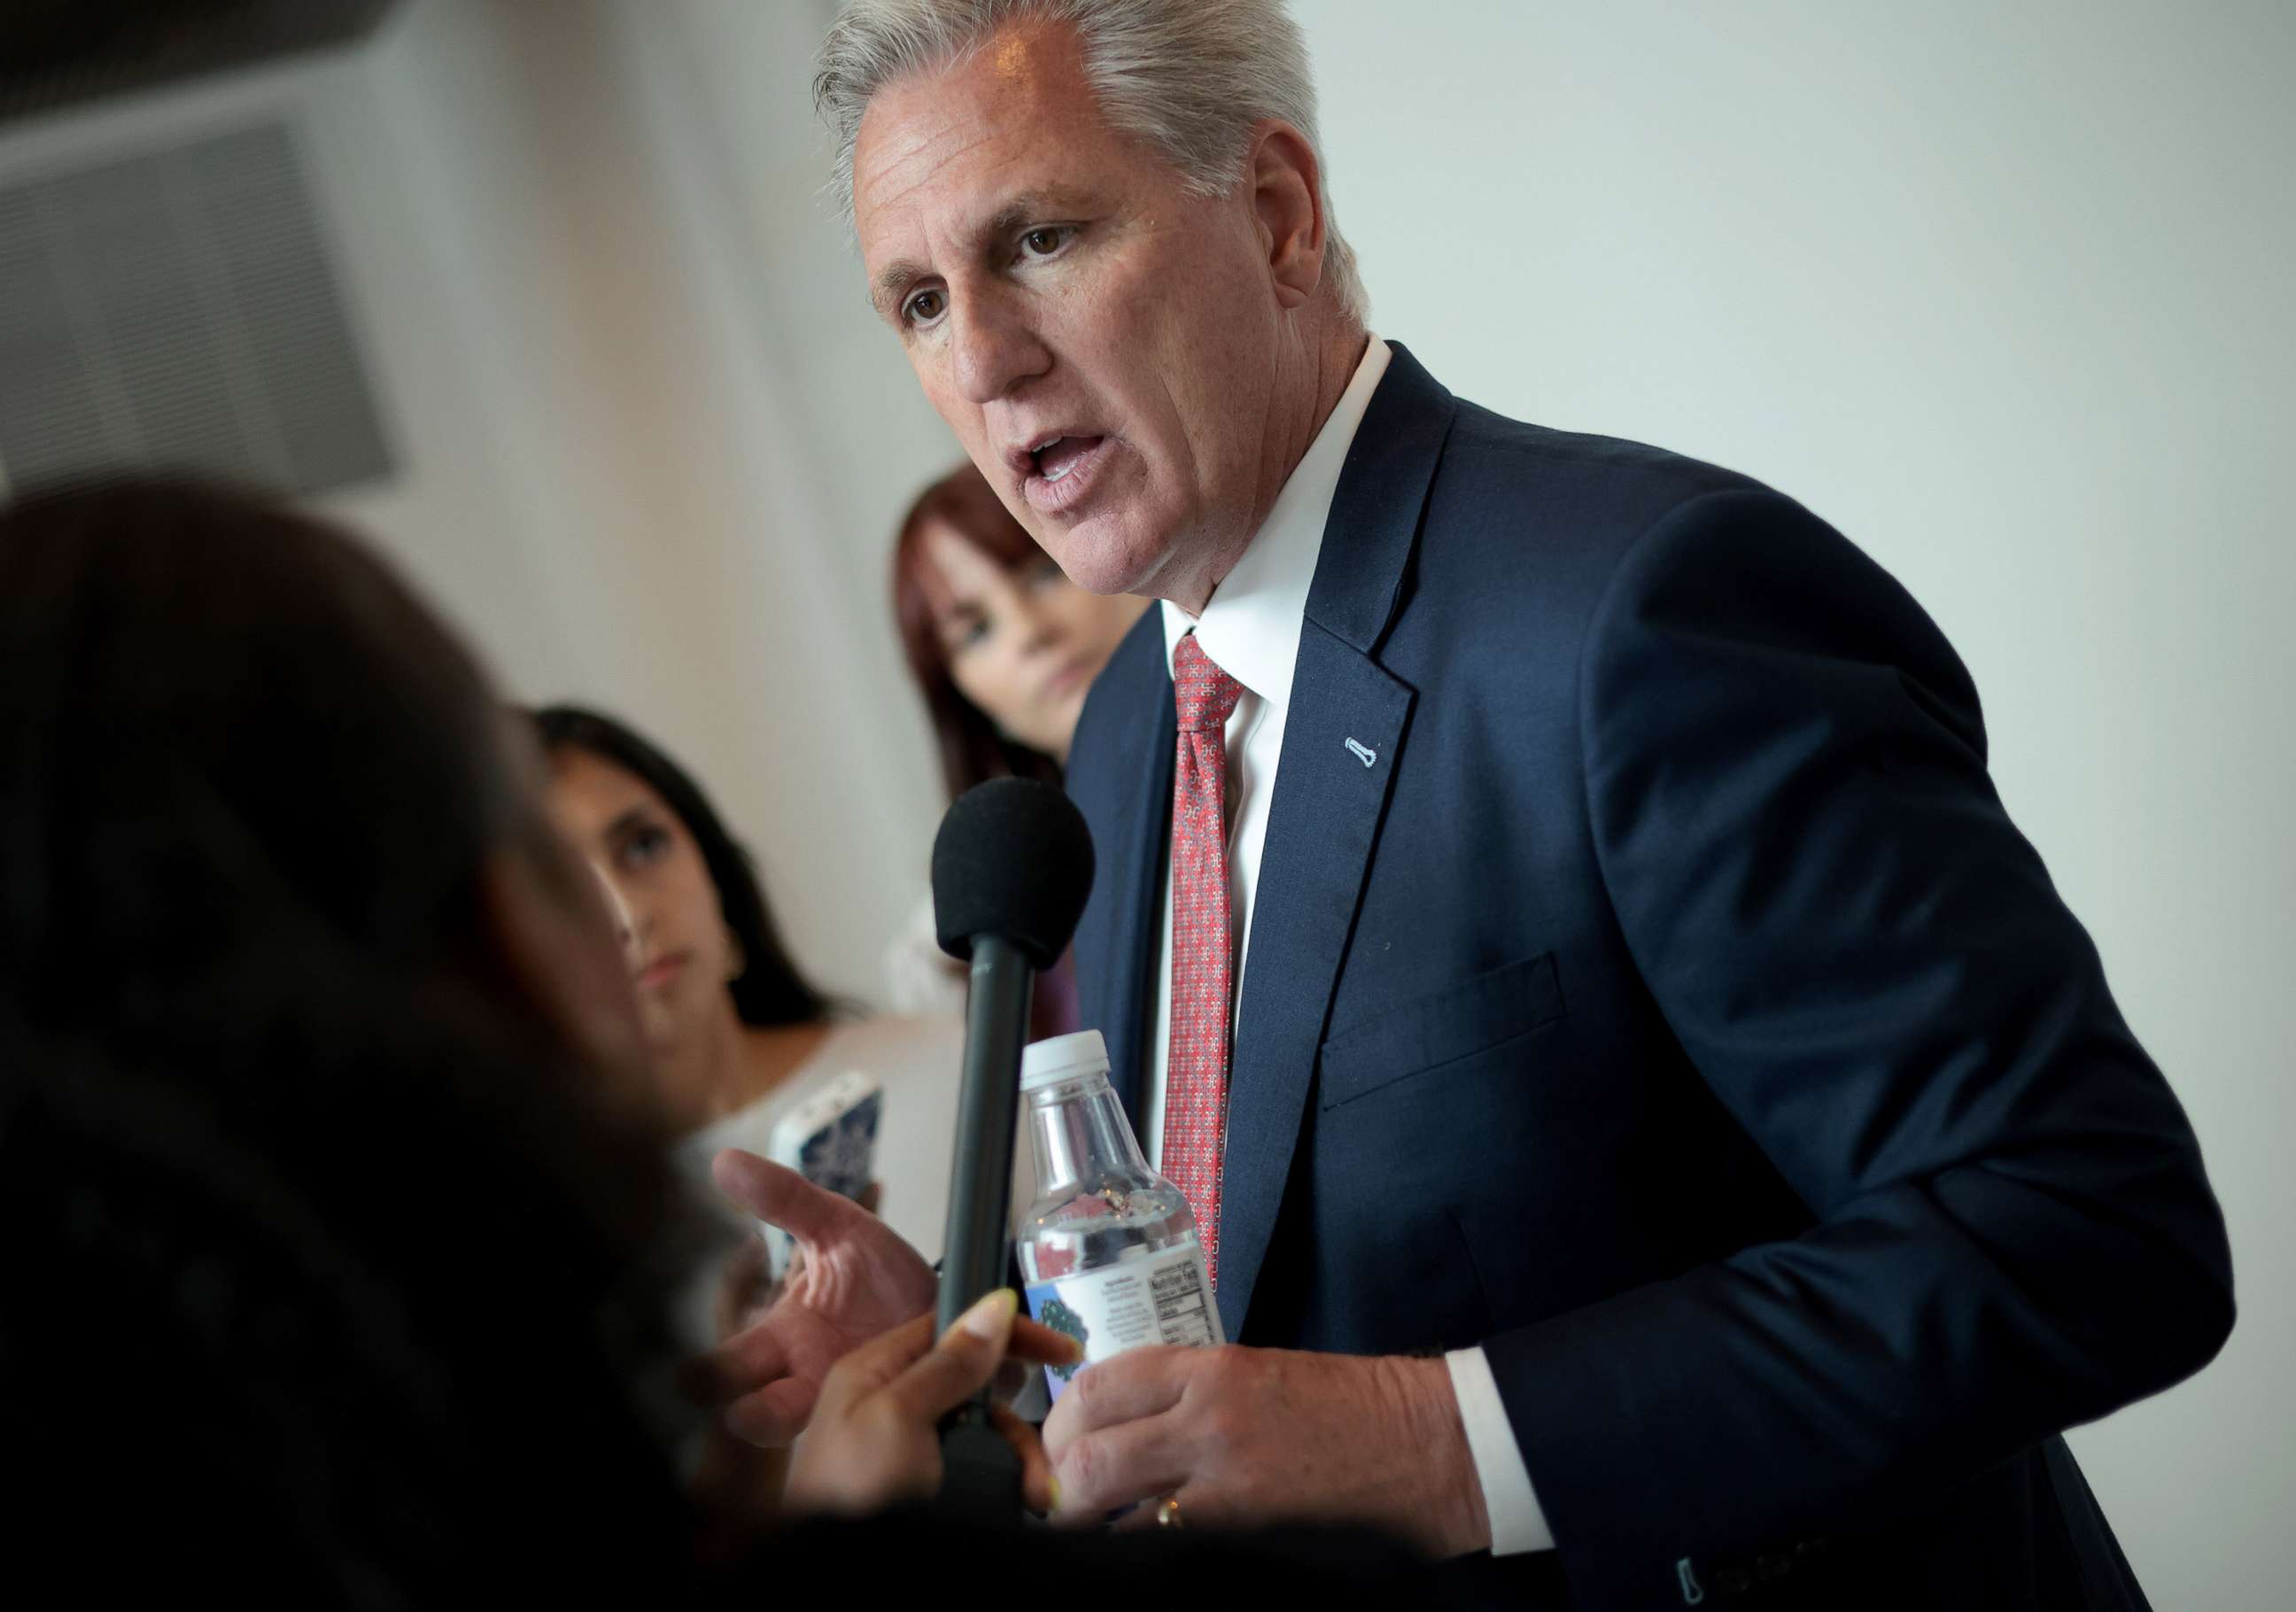 PHOTO: House Minority Leader Kevin McCarthy answers questions from reporters following a press conference in Washington June 23, 2021.